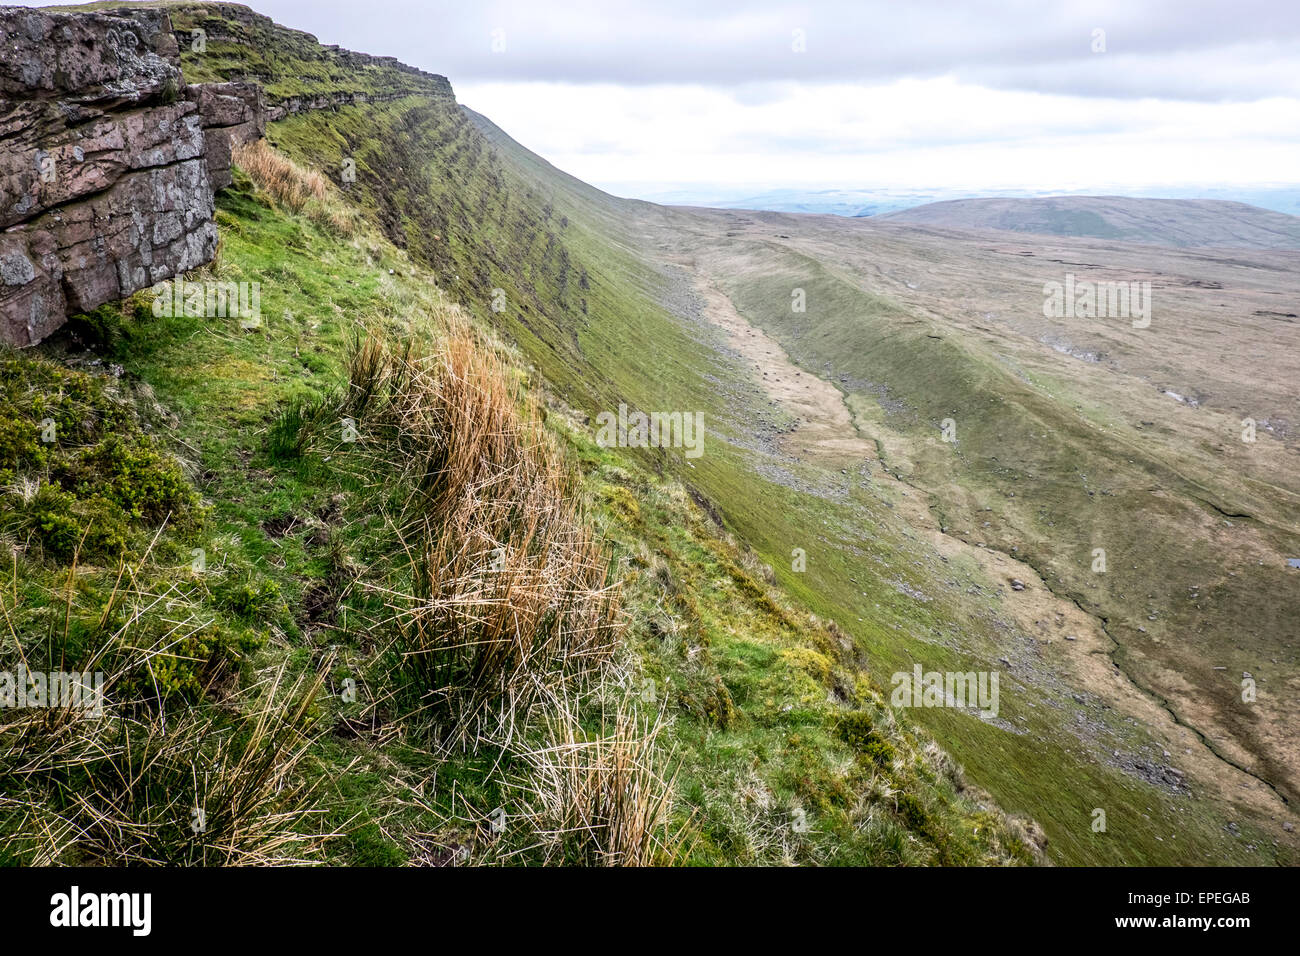 Moraine, below a  mountain slope. Stock Photo